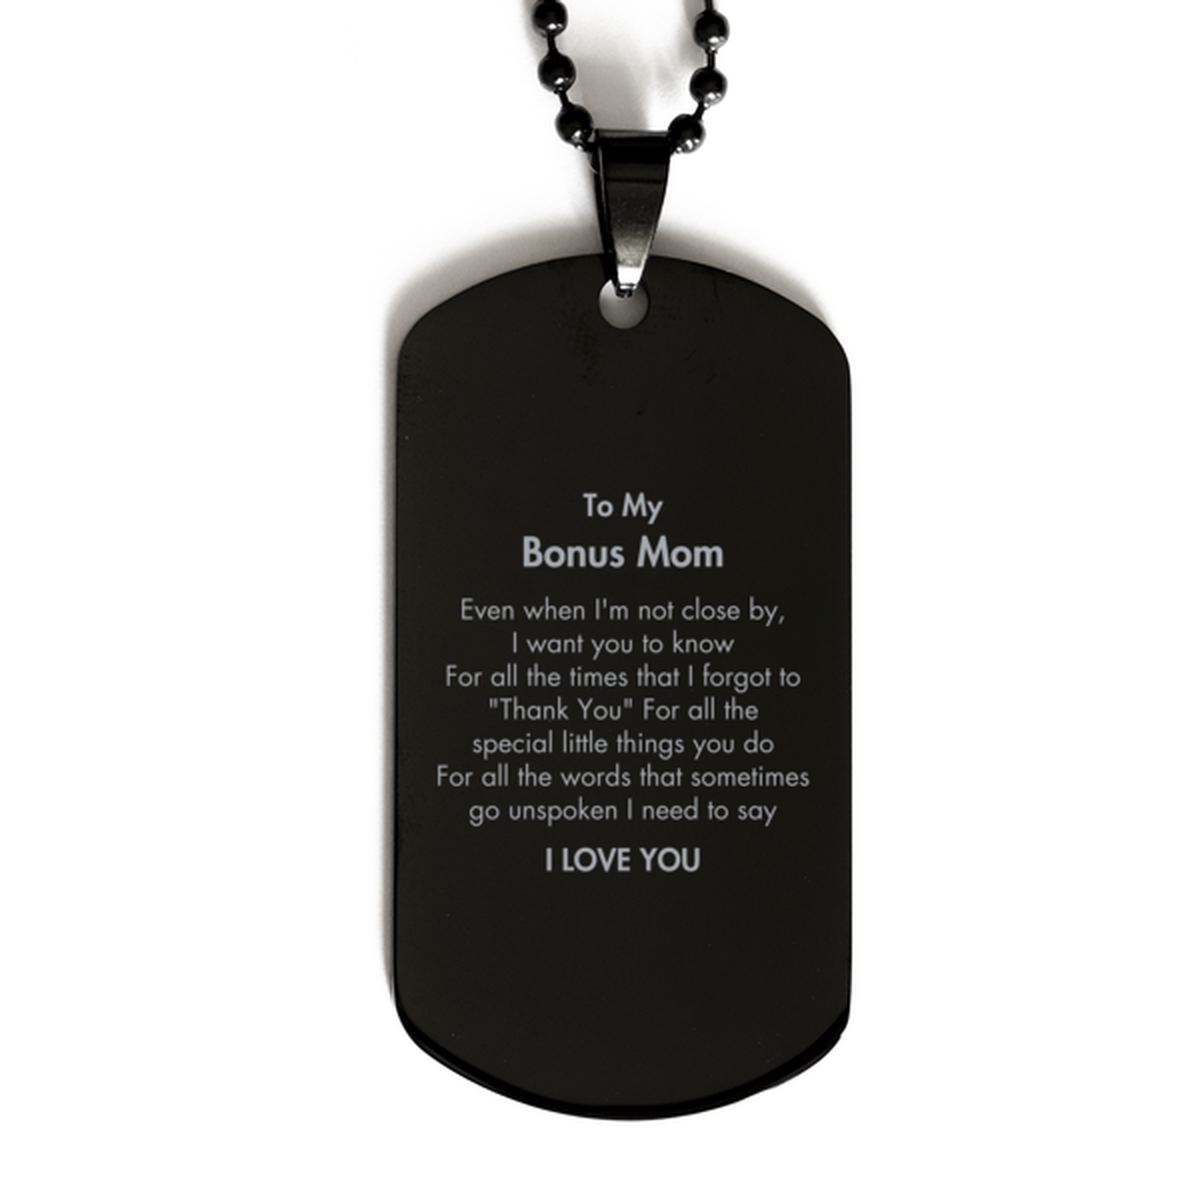 Thank You Gifts for Bonus Mom, Keepsake Black Dog Tag Gifts for Bonus Mom Birthday Mother's day Father's Day Bonus Mom For all the words That sometimes go unspoken I need to say I LOVE YOU